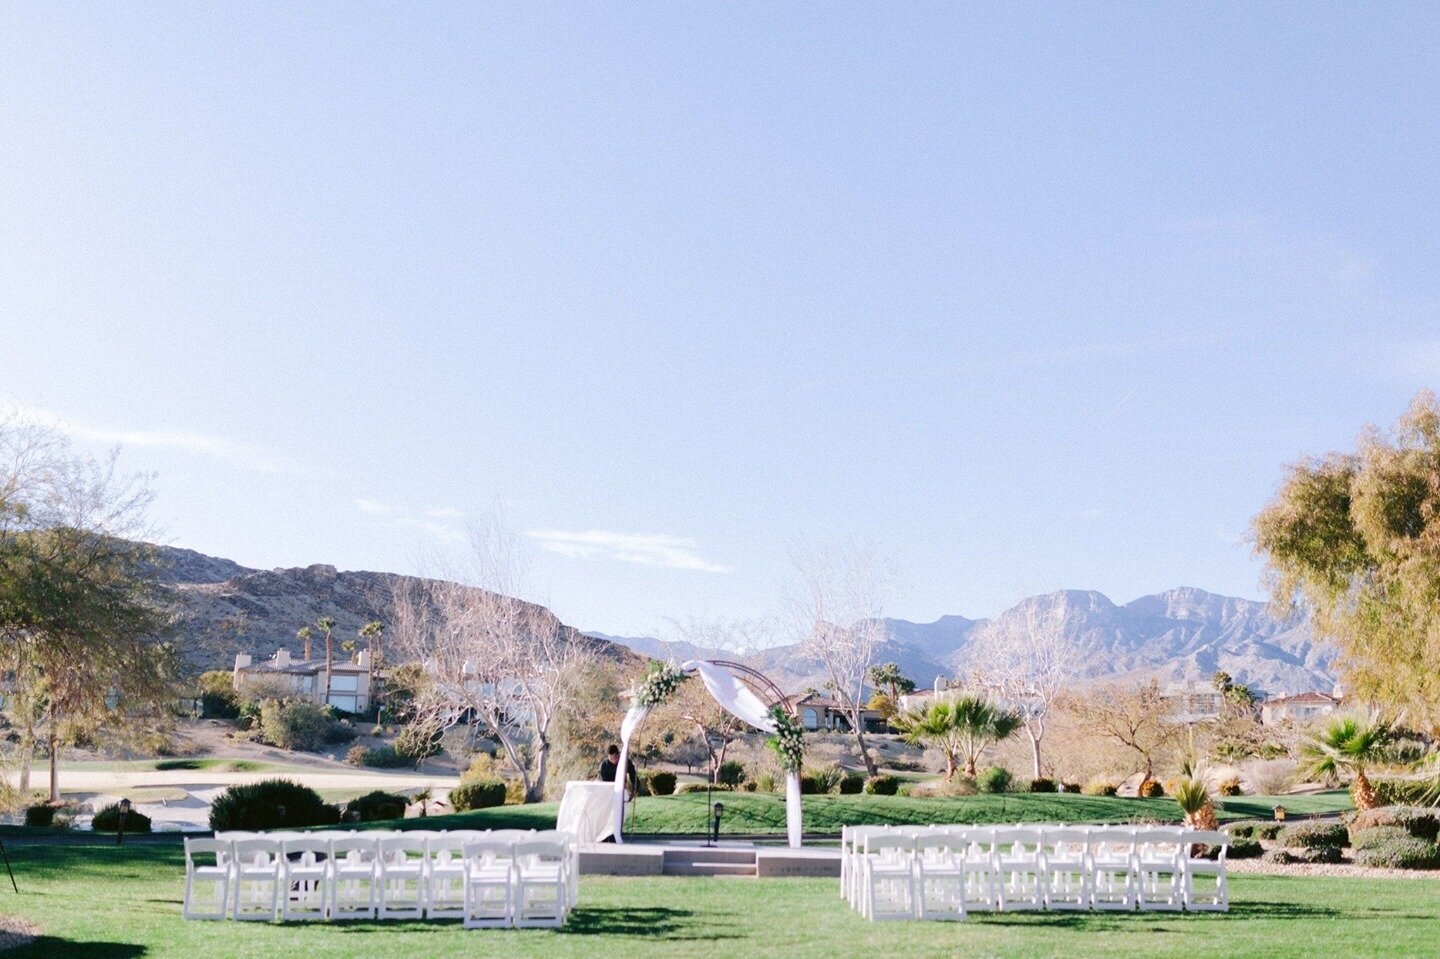 Our wedding lawn will accommodate 300 people with views of the Red Rock Mountains as your background. Modern, simple, or a little over the top...there's never a wrong answer and we LOVE hearing about your wedding dreams. ⁣
⁣
#weddinginspo #weddingcer